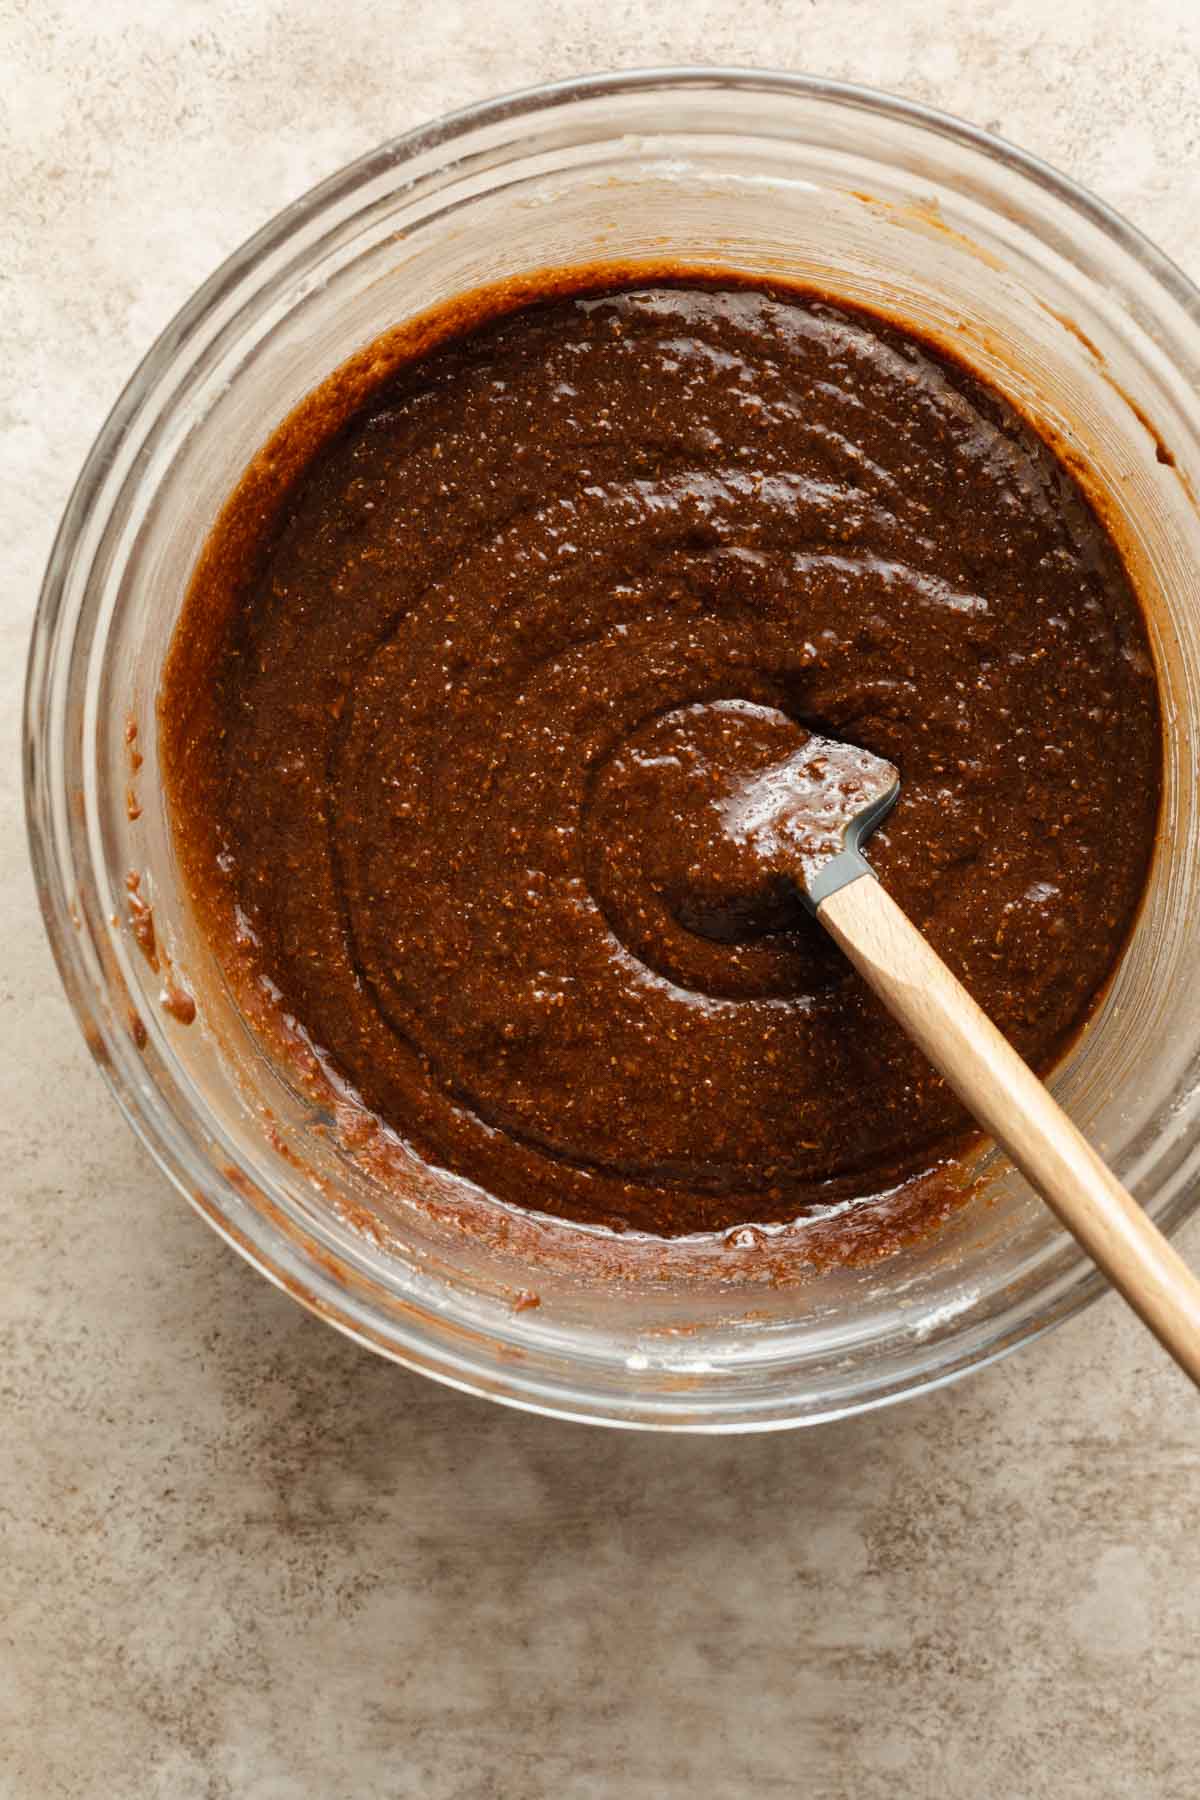 Almond butter brownie batter being stirred in a glass bowl with a spatula.